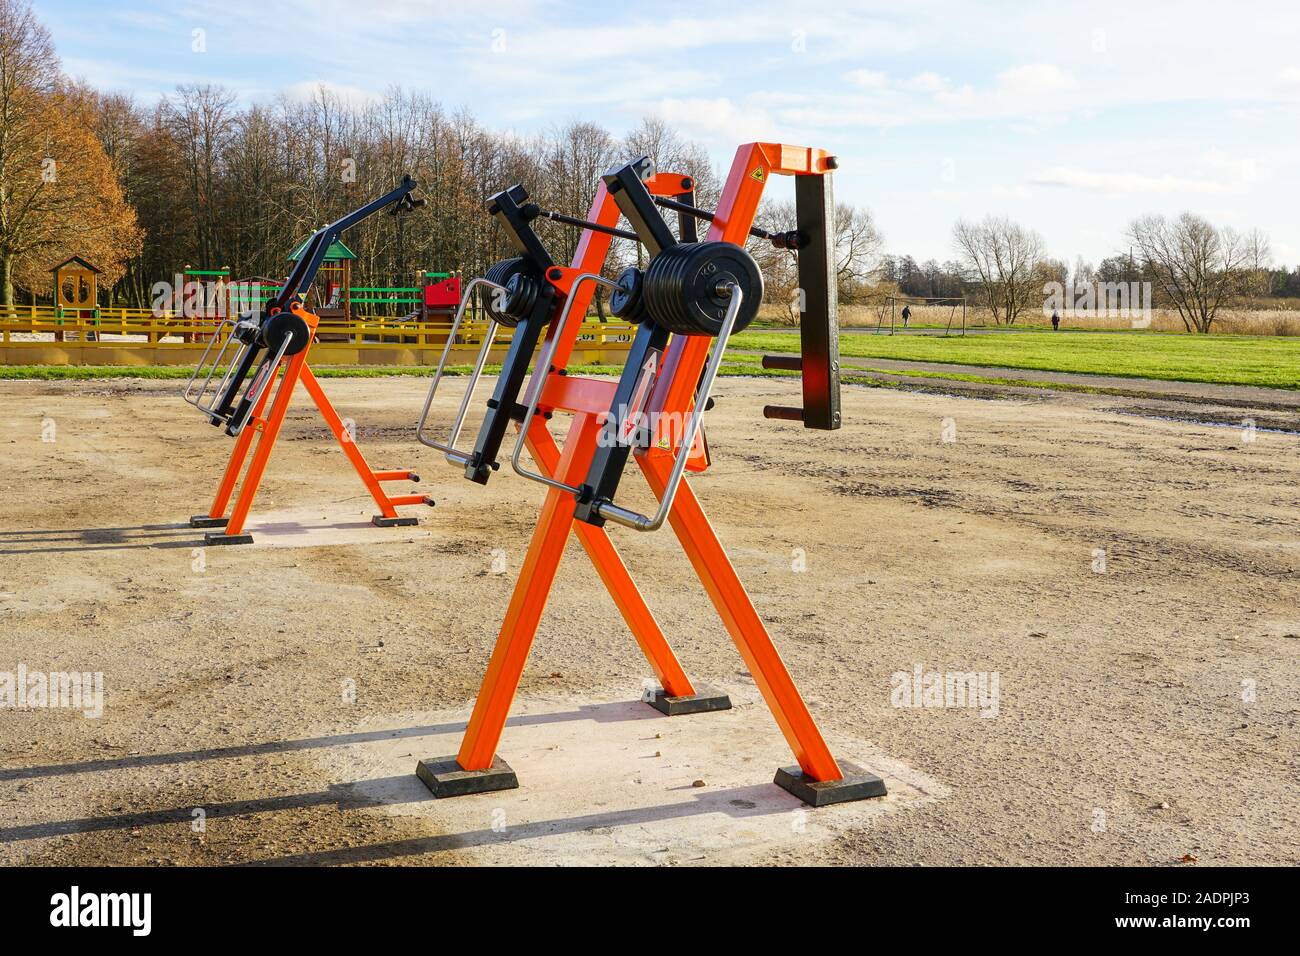 new modern outdoor fitness equipment for muscle training Stock Photo